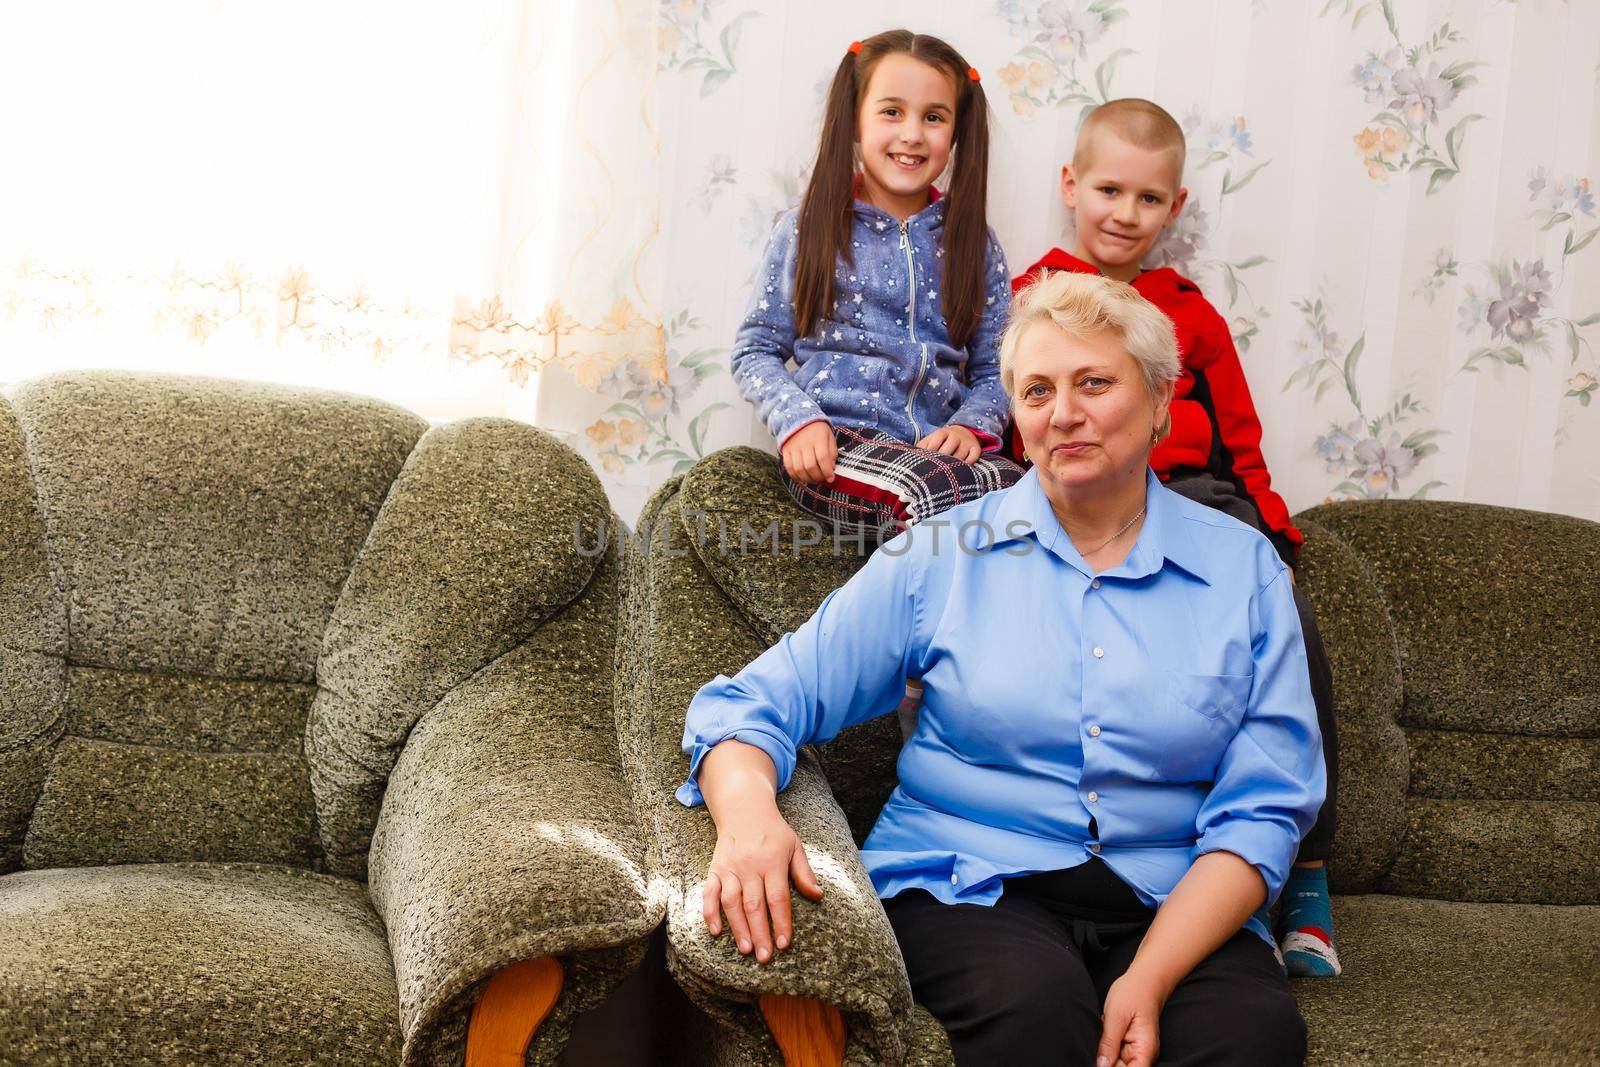 Grandmother and grandchildren sitting together on sofa in living room by Andelov13